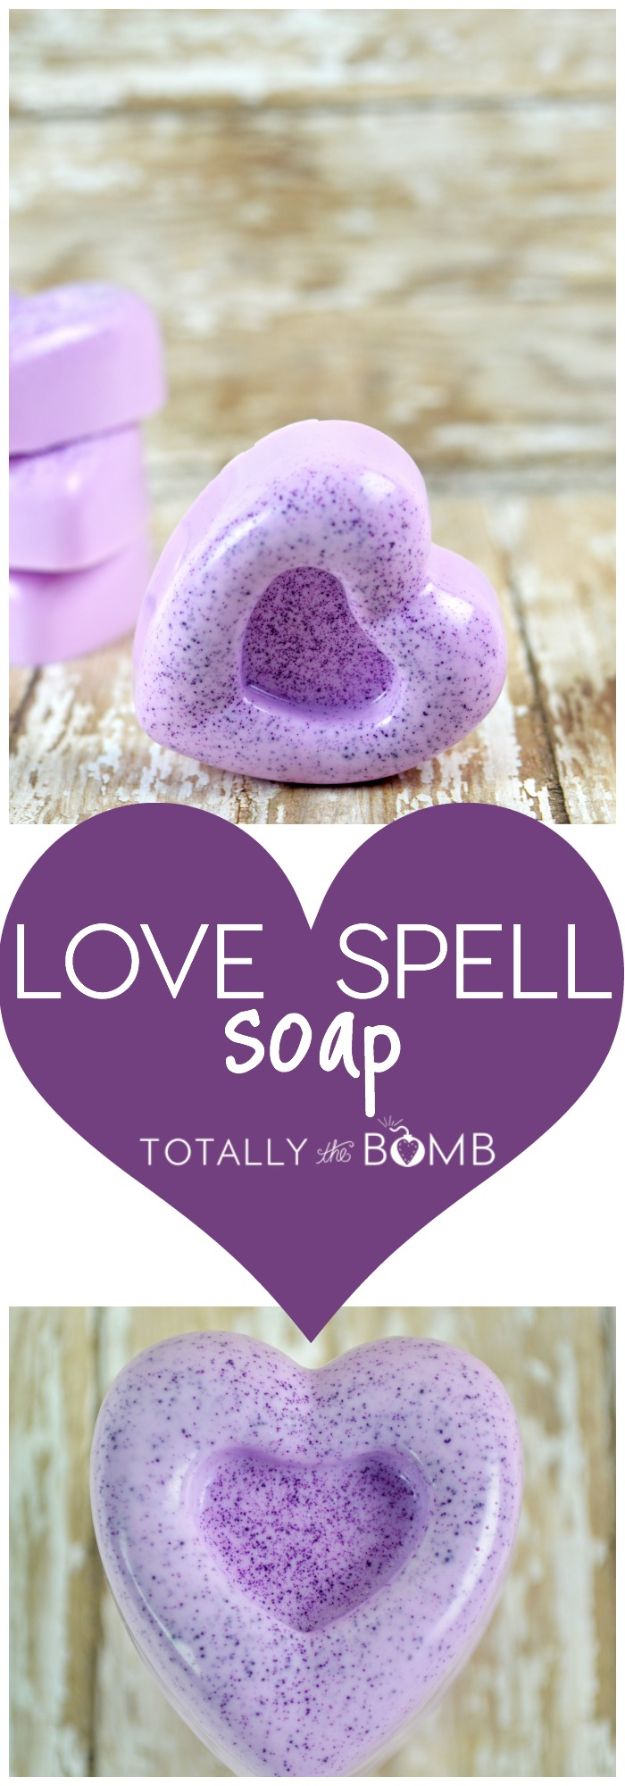 Soap Recipes DIY - Love Spell Soap - DIY Soap Recipe Ideas - Best Soap Tutorials for Soap Making Without Lye - Easy Cold Process Melt and Pour Tips for Beginners - Crockpot, Essential Oils, Homemade Natural Soaps and Products - Creative Crafts and DIY for Teens, Kids and Adults #soaprecipes #diygifts #soapmaking